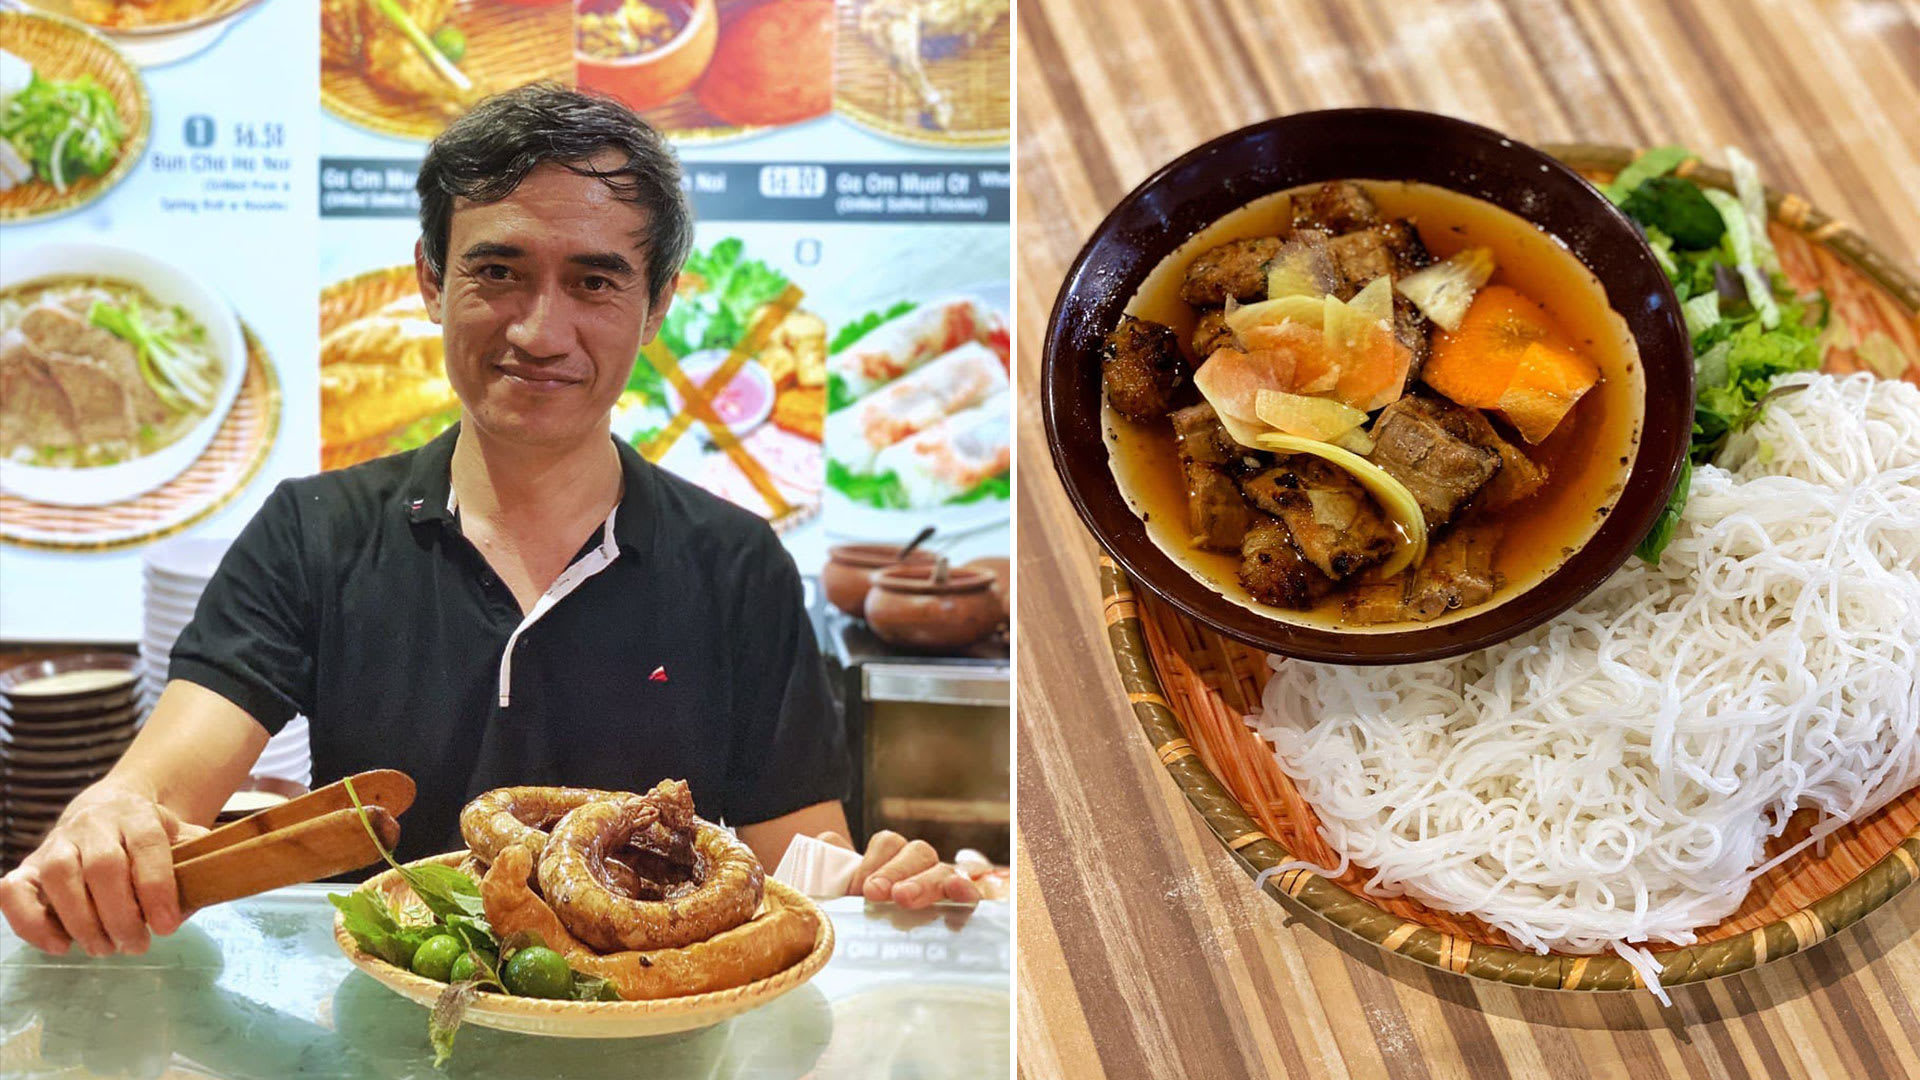 Hanoi-Born Hawker With MBA Now Sells Charcoal-Grilled Bun Cha At Kopitiam